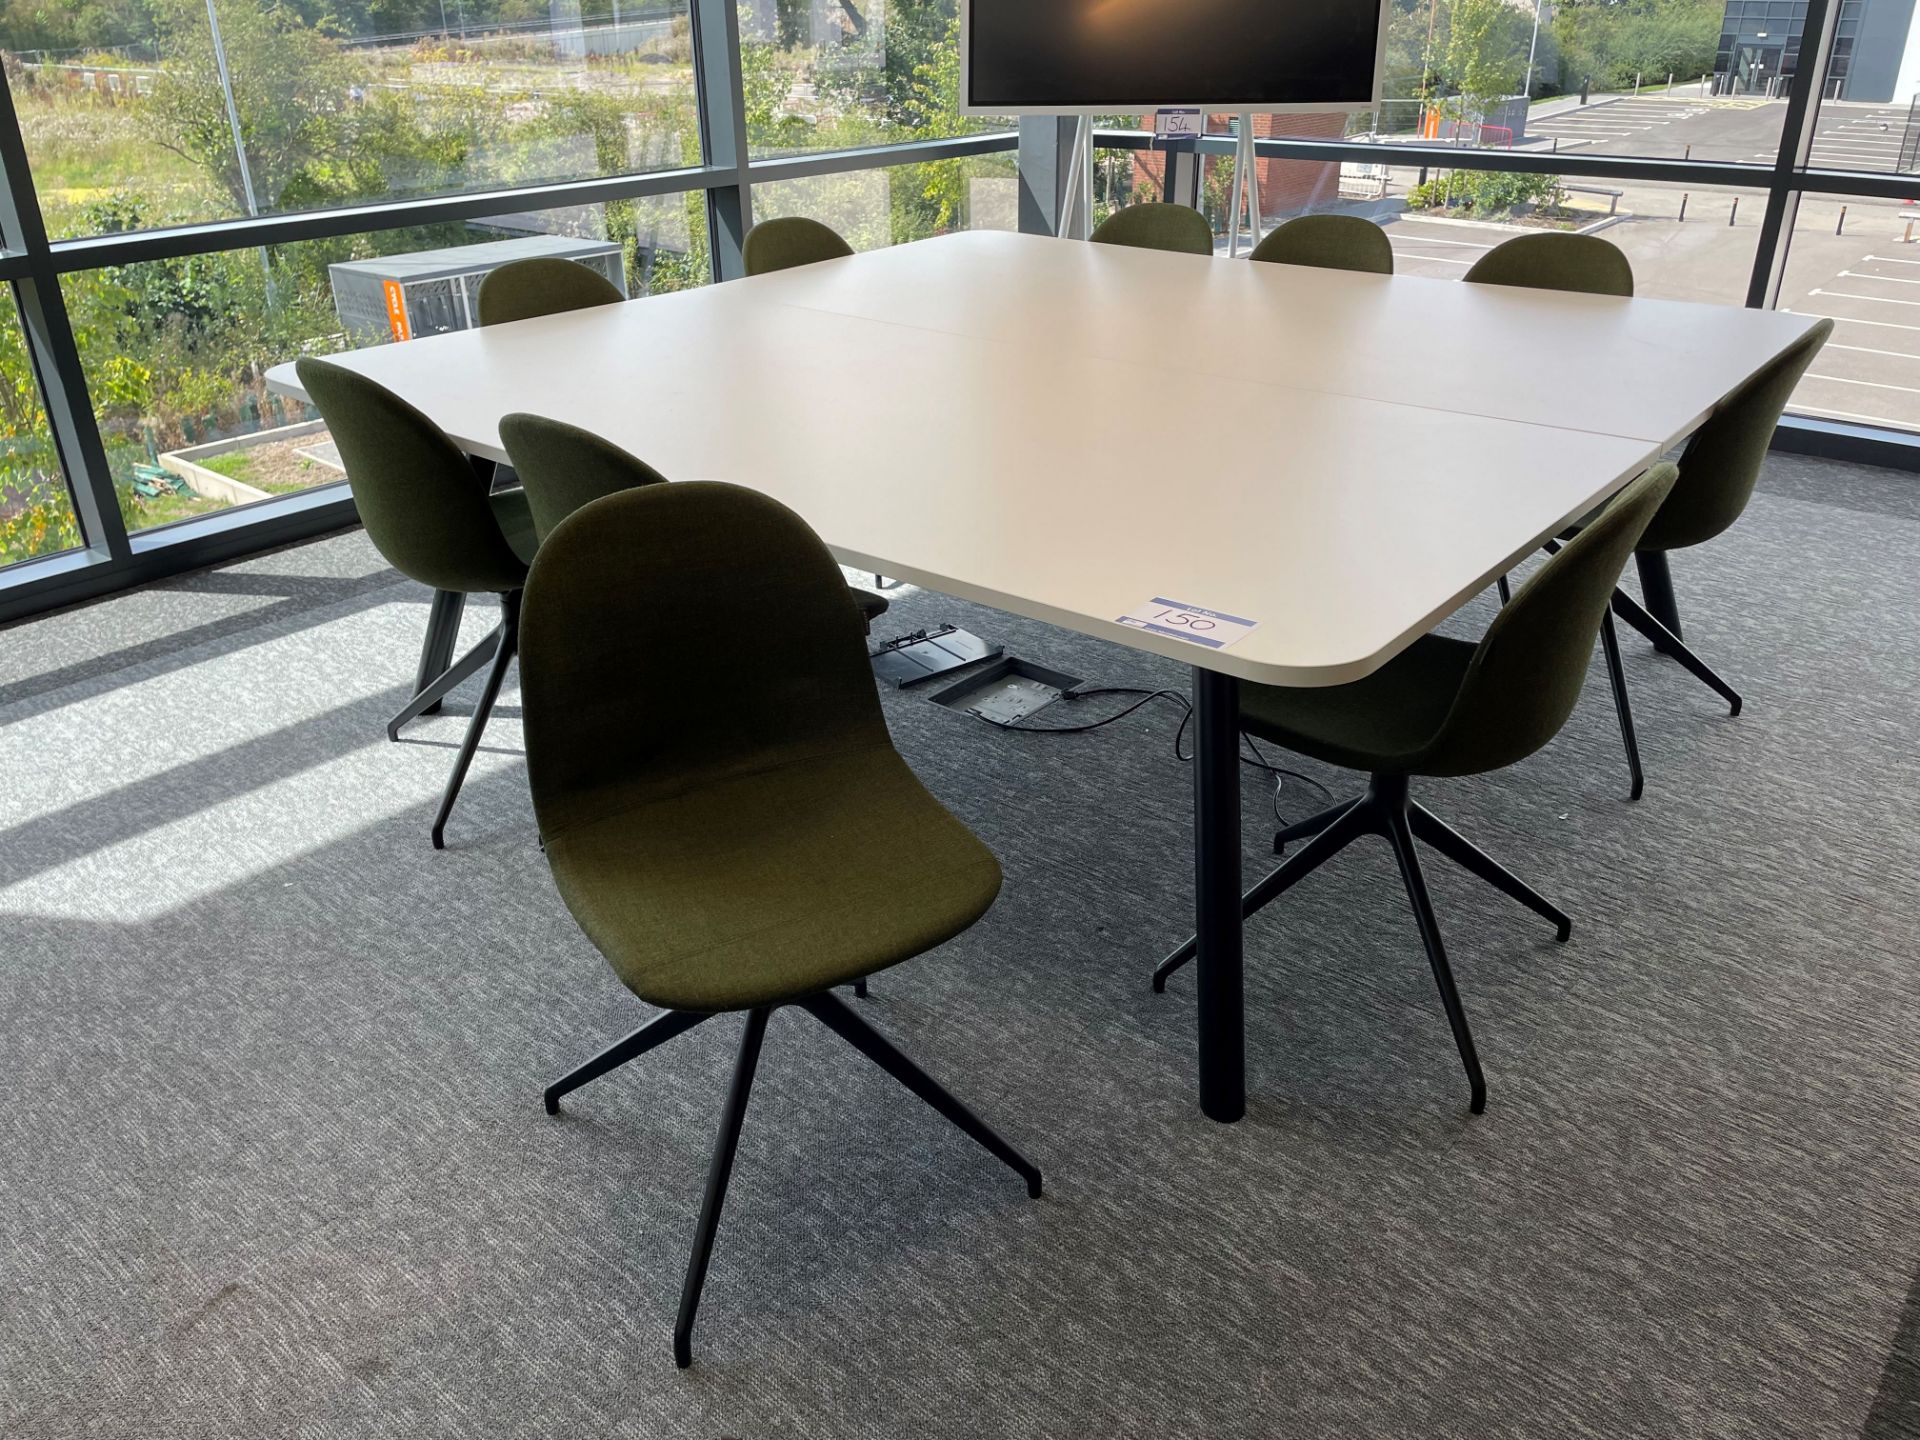 White Boardroom Table, 10 Fabric Upholstered Chairs - Image 2 of 2